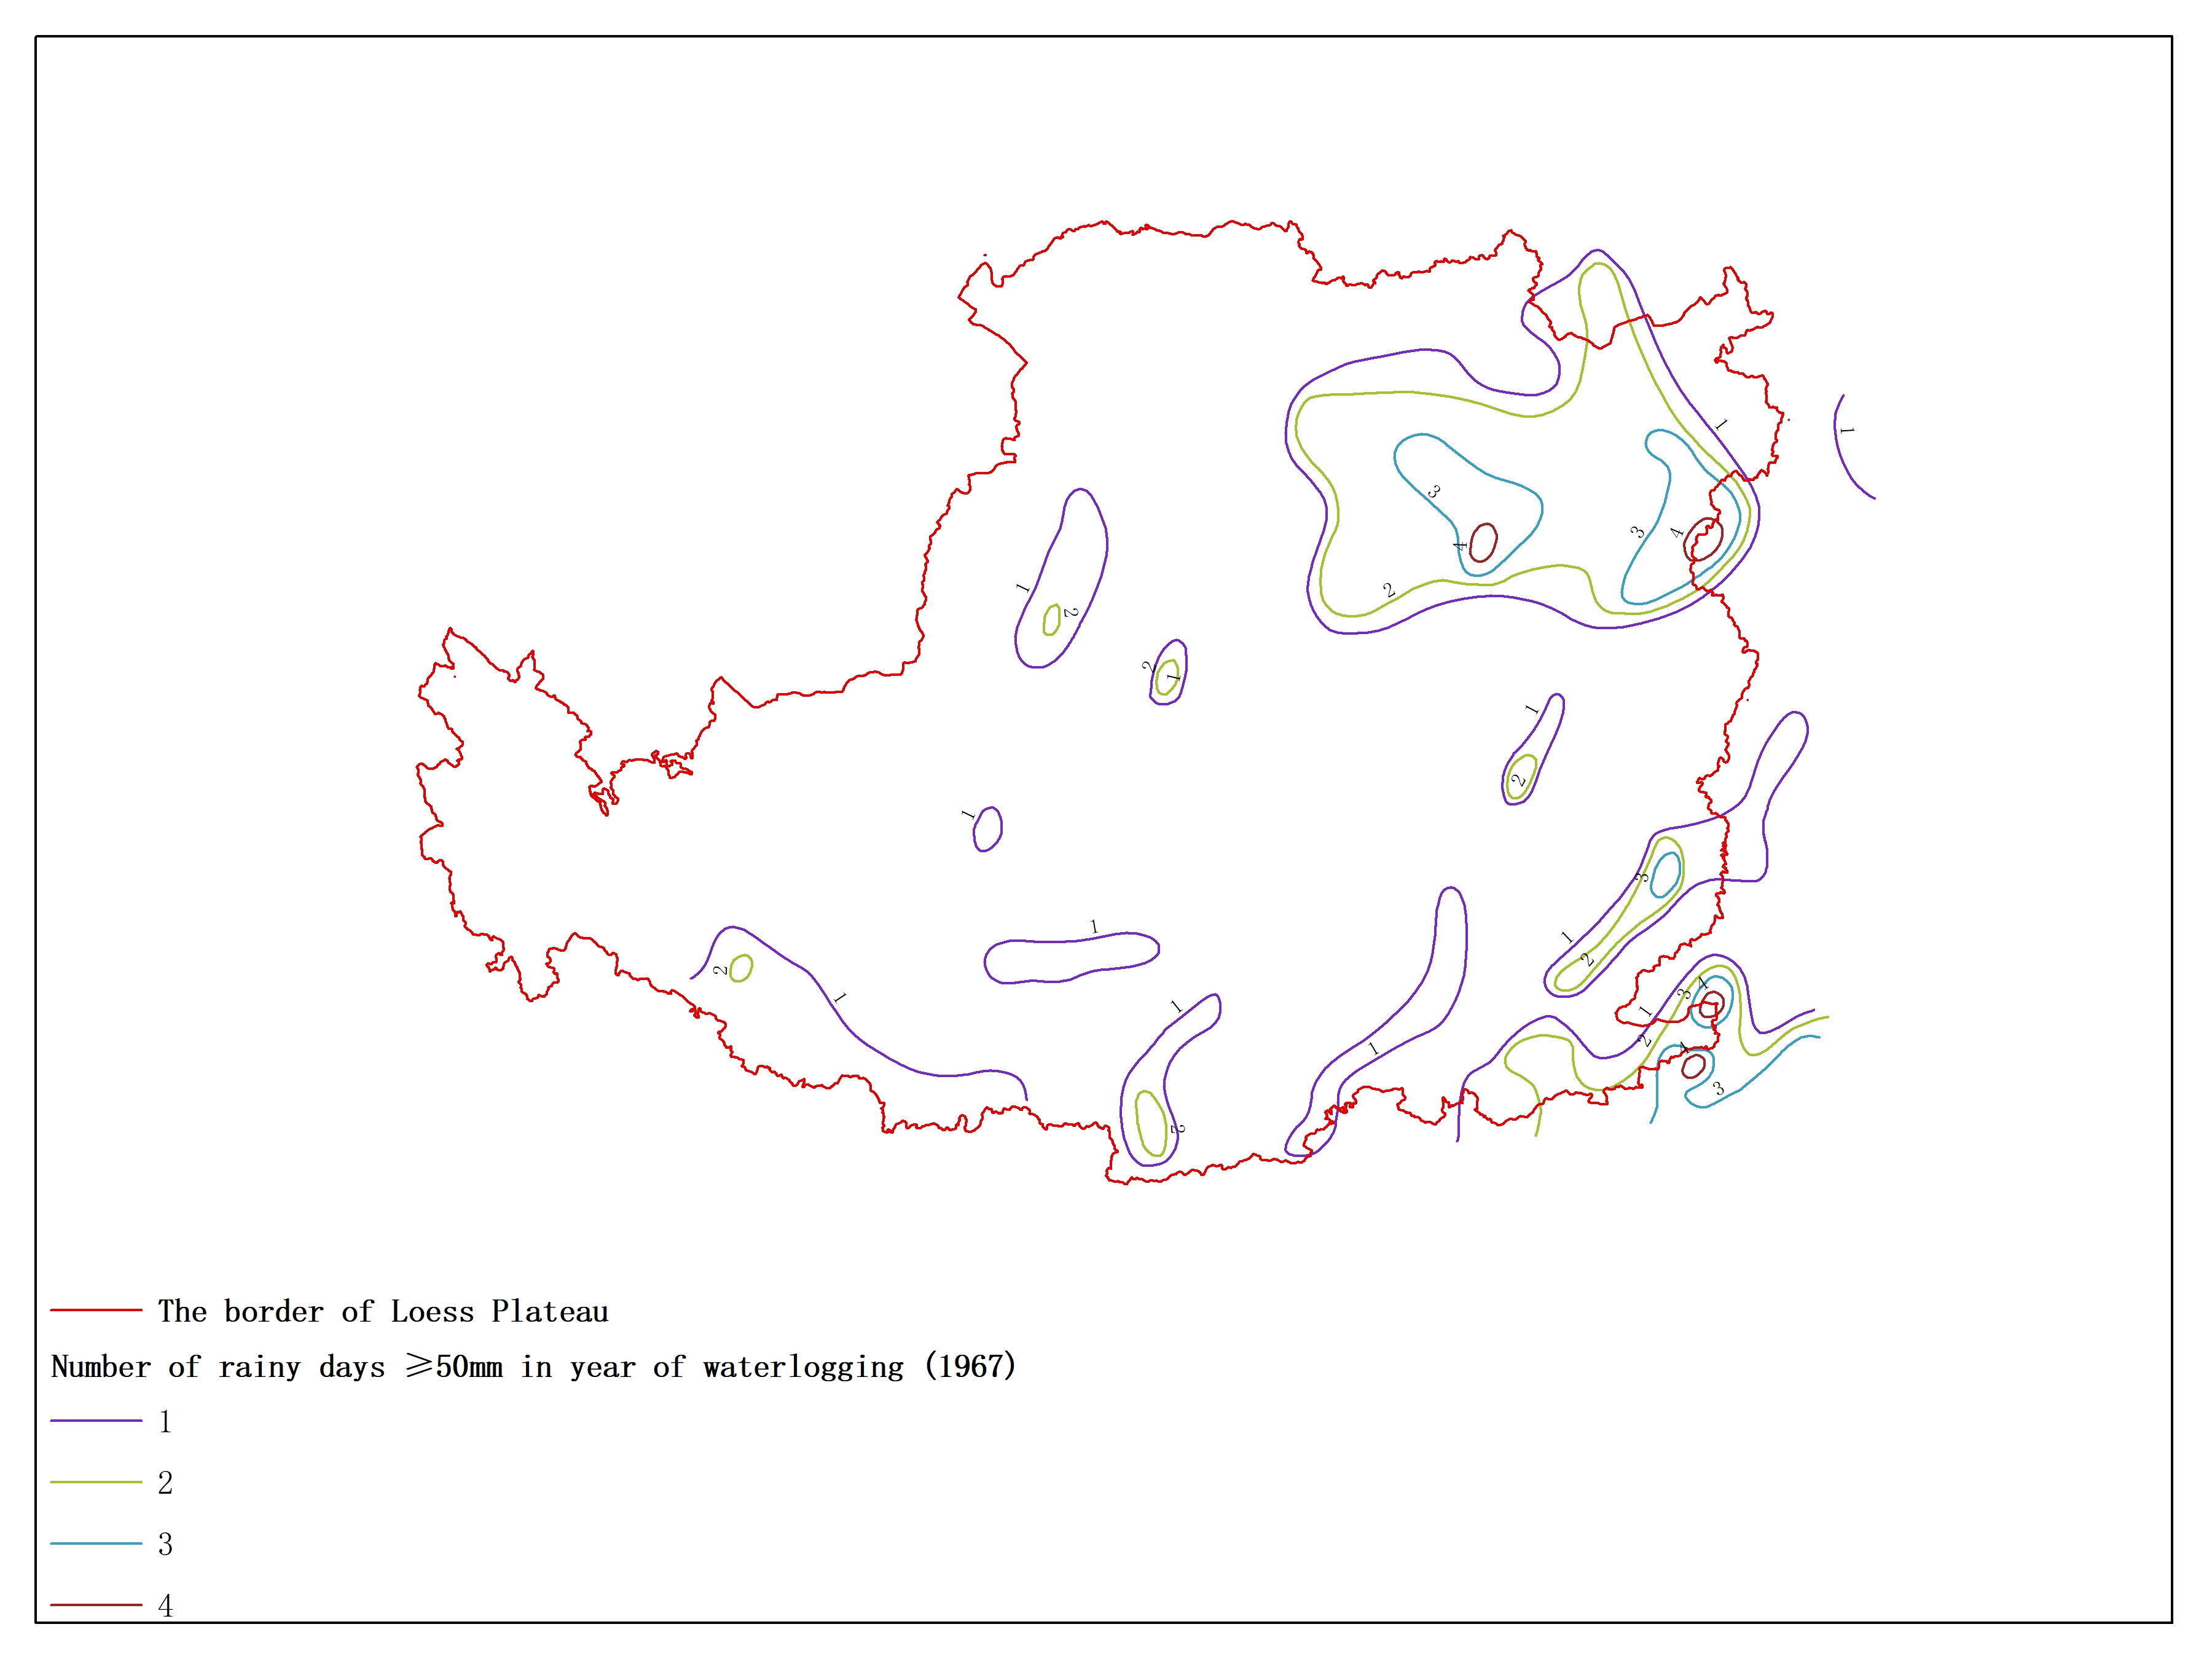 Agricultural climate resource atlas of Loess Plateau-Number of rainy days ≥50mm in year of waterlogging (1967)